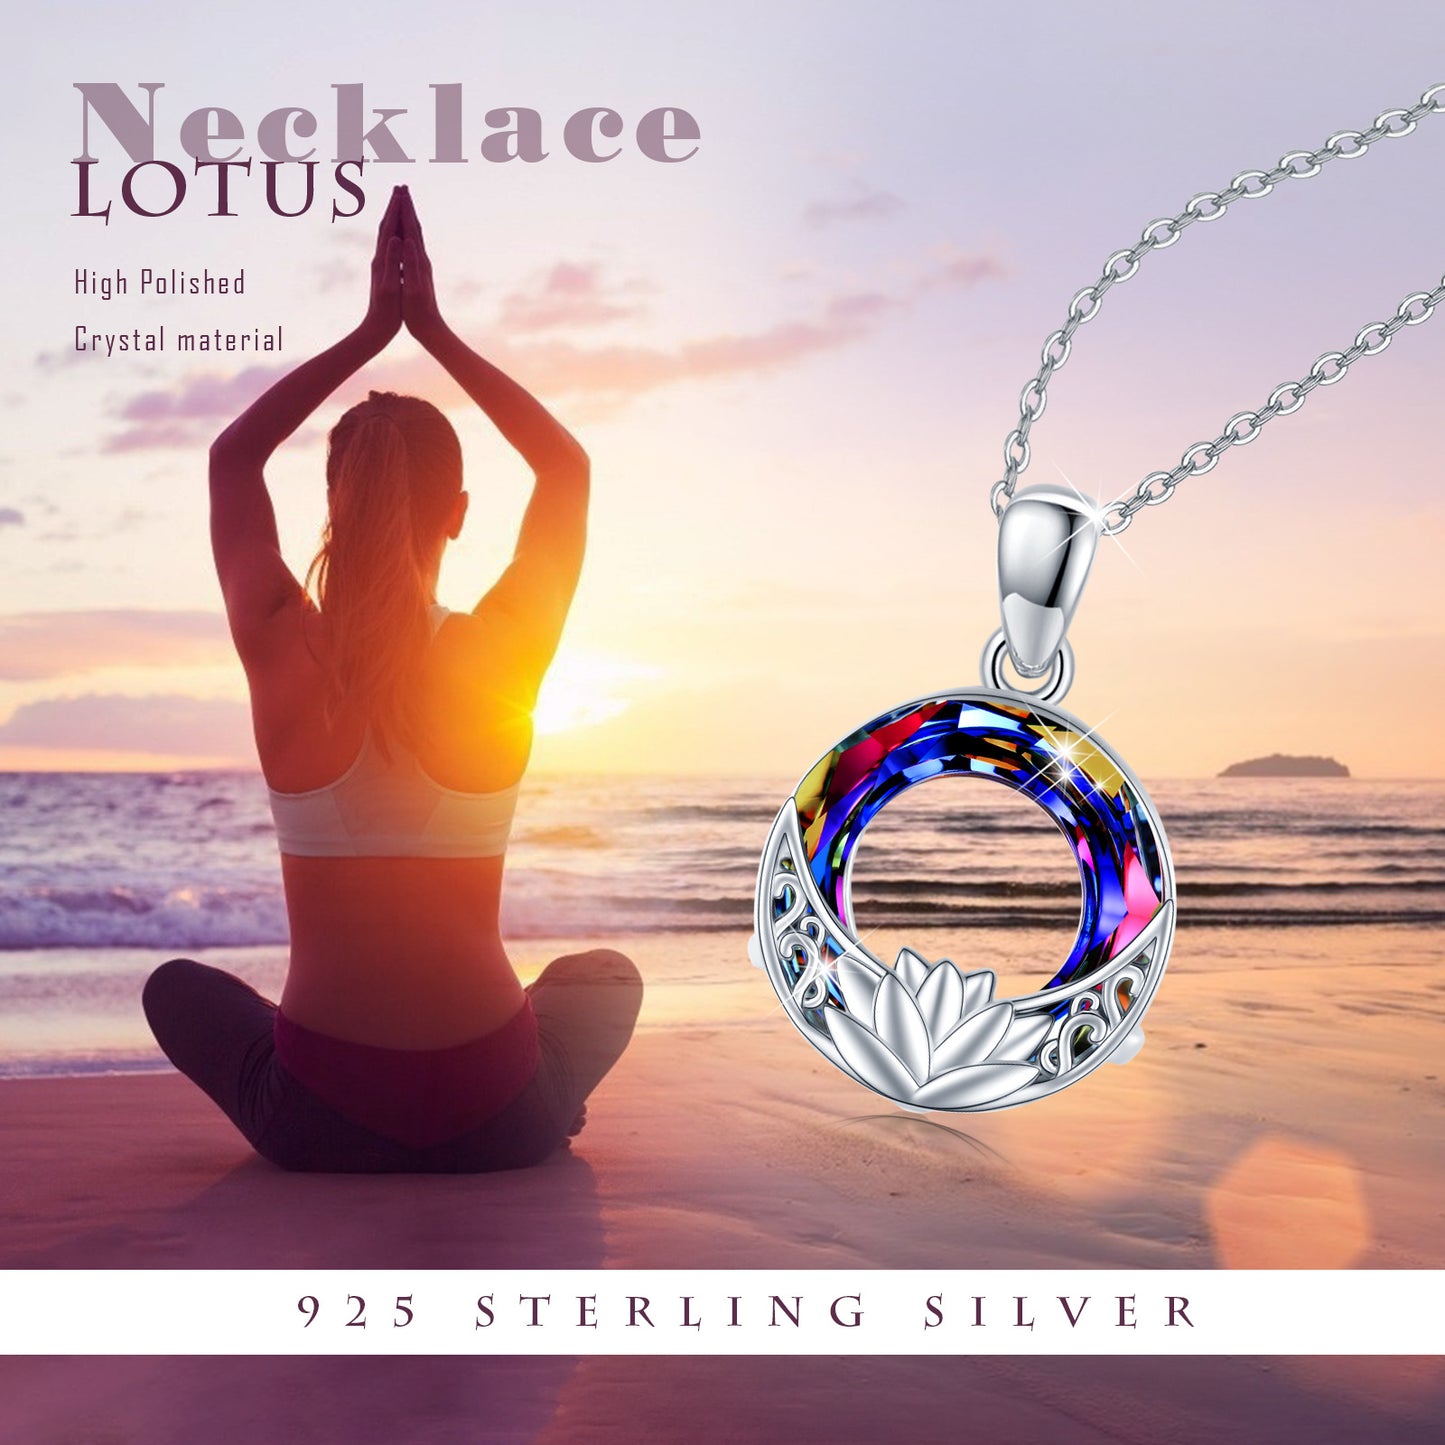 Crystal Necklace 925 Sterling Silver Necklace Lotus Amulet Protection Good Luck Necklace Jewellery Gifts for Ladies Women Girls